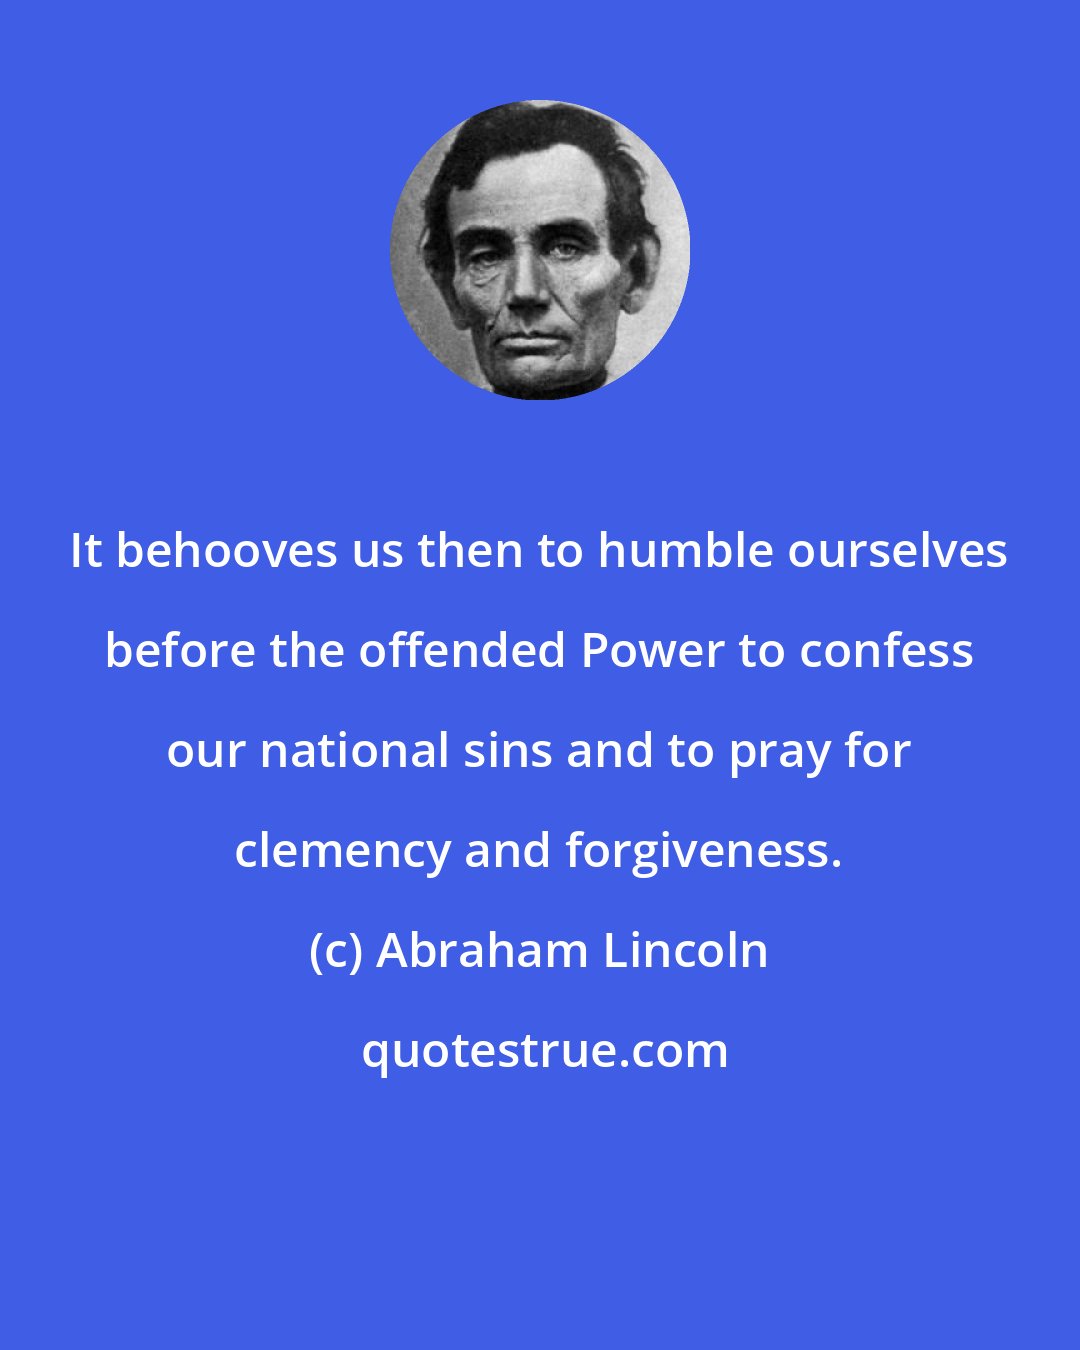 Abraham Lincoln: It behooves us then to humble ourselves before the offended Power to confess our national sins and to pray for clemency and forgiveness.